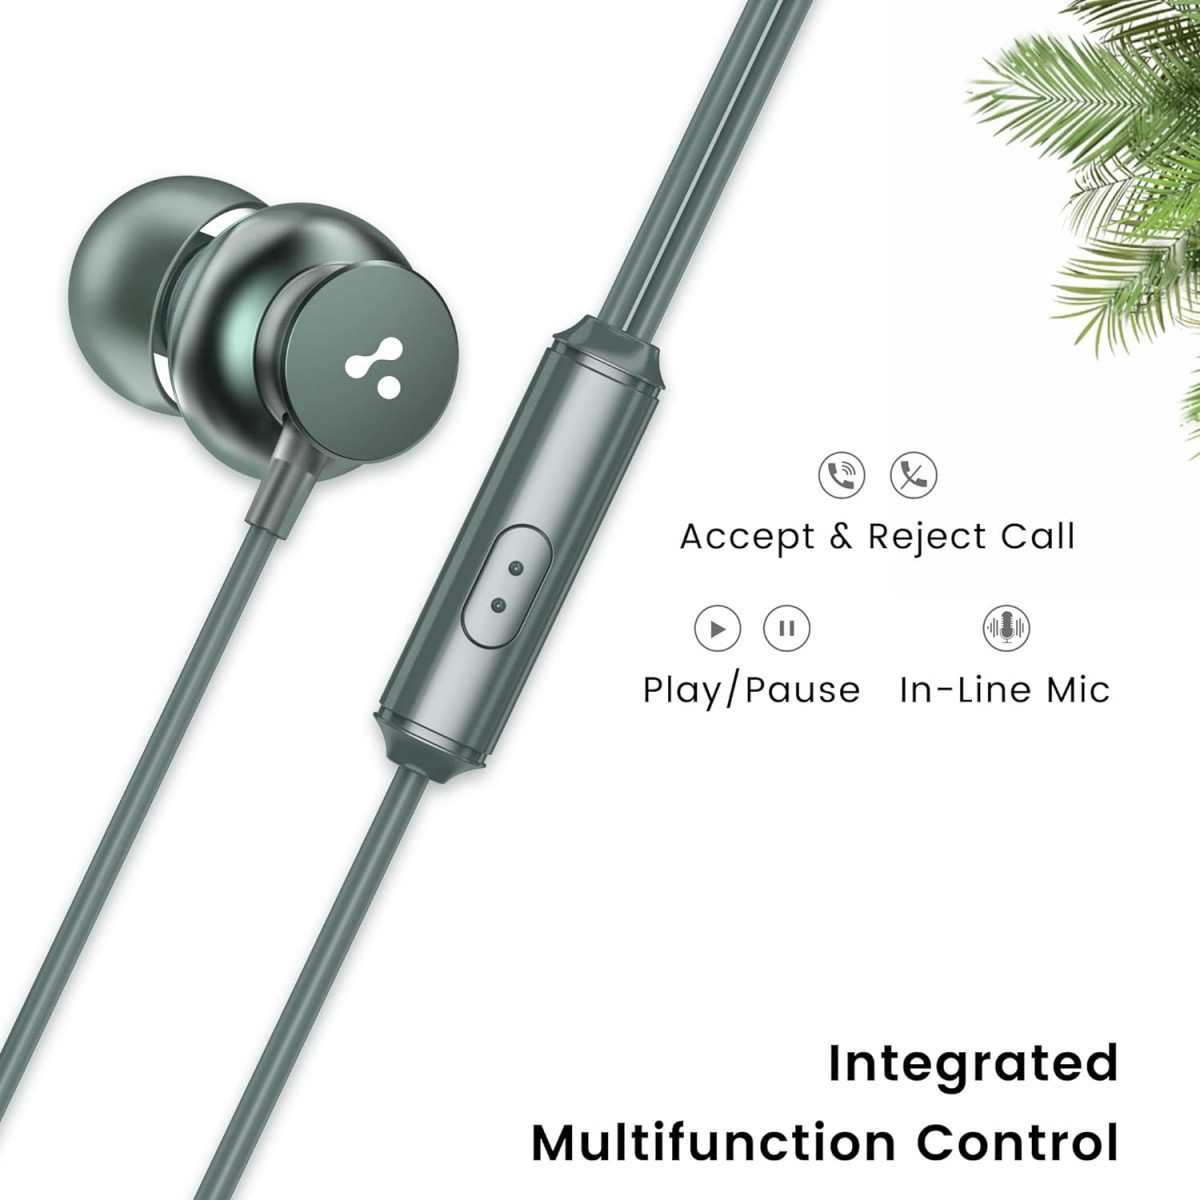 Ambrane Stringz 38 Wired Earphones with Mic Powerful HD Sound with High Bass Tangle Free Cable Comfort in-Ear Fit 35mm Jack Green Normal